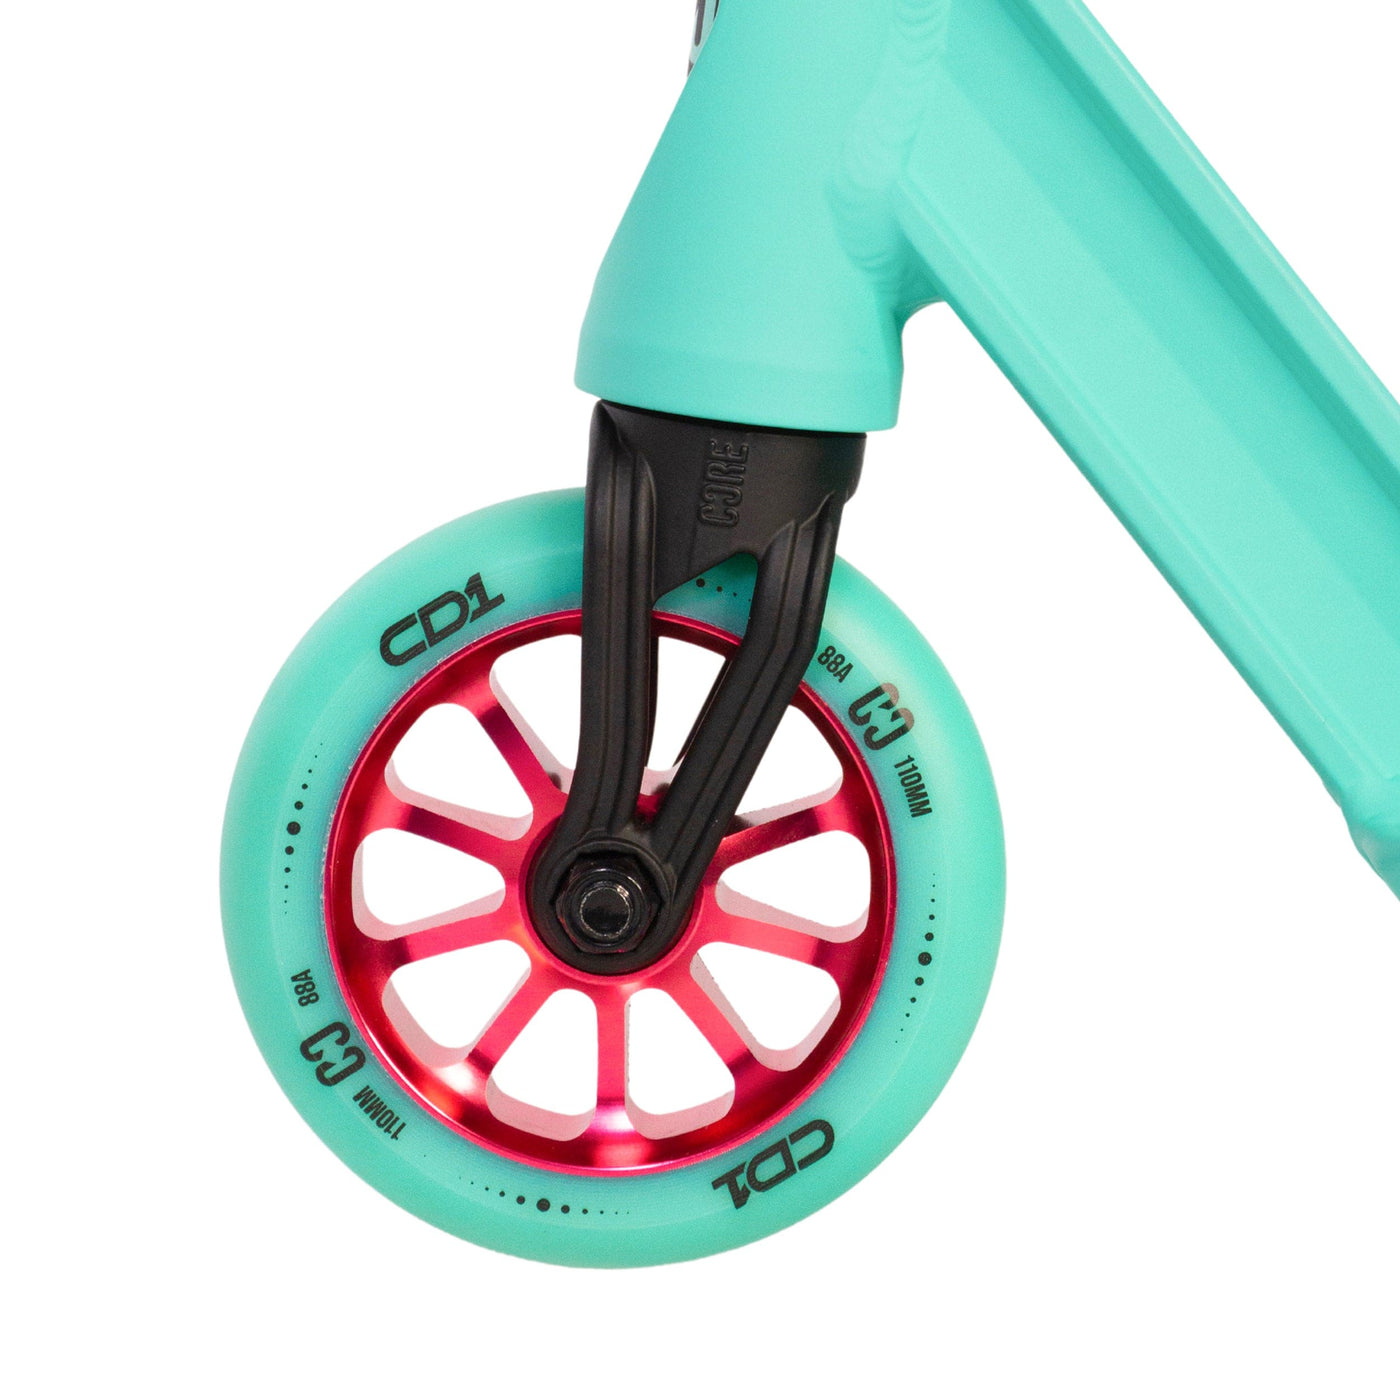 CORE CD1 Complete Stunt Scooter Teal & Pink I Adult Stunt Scooter Front Wheel